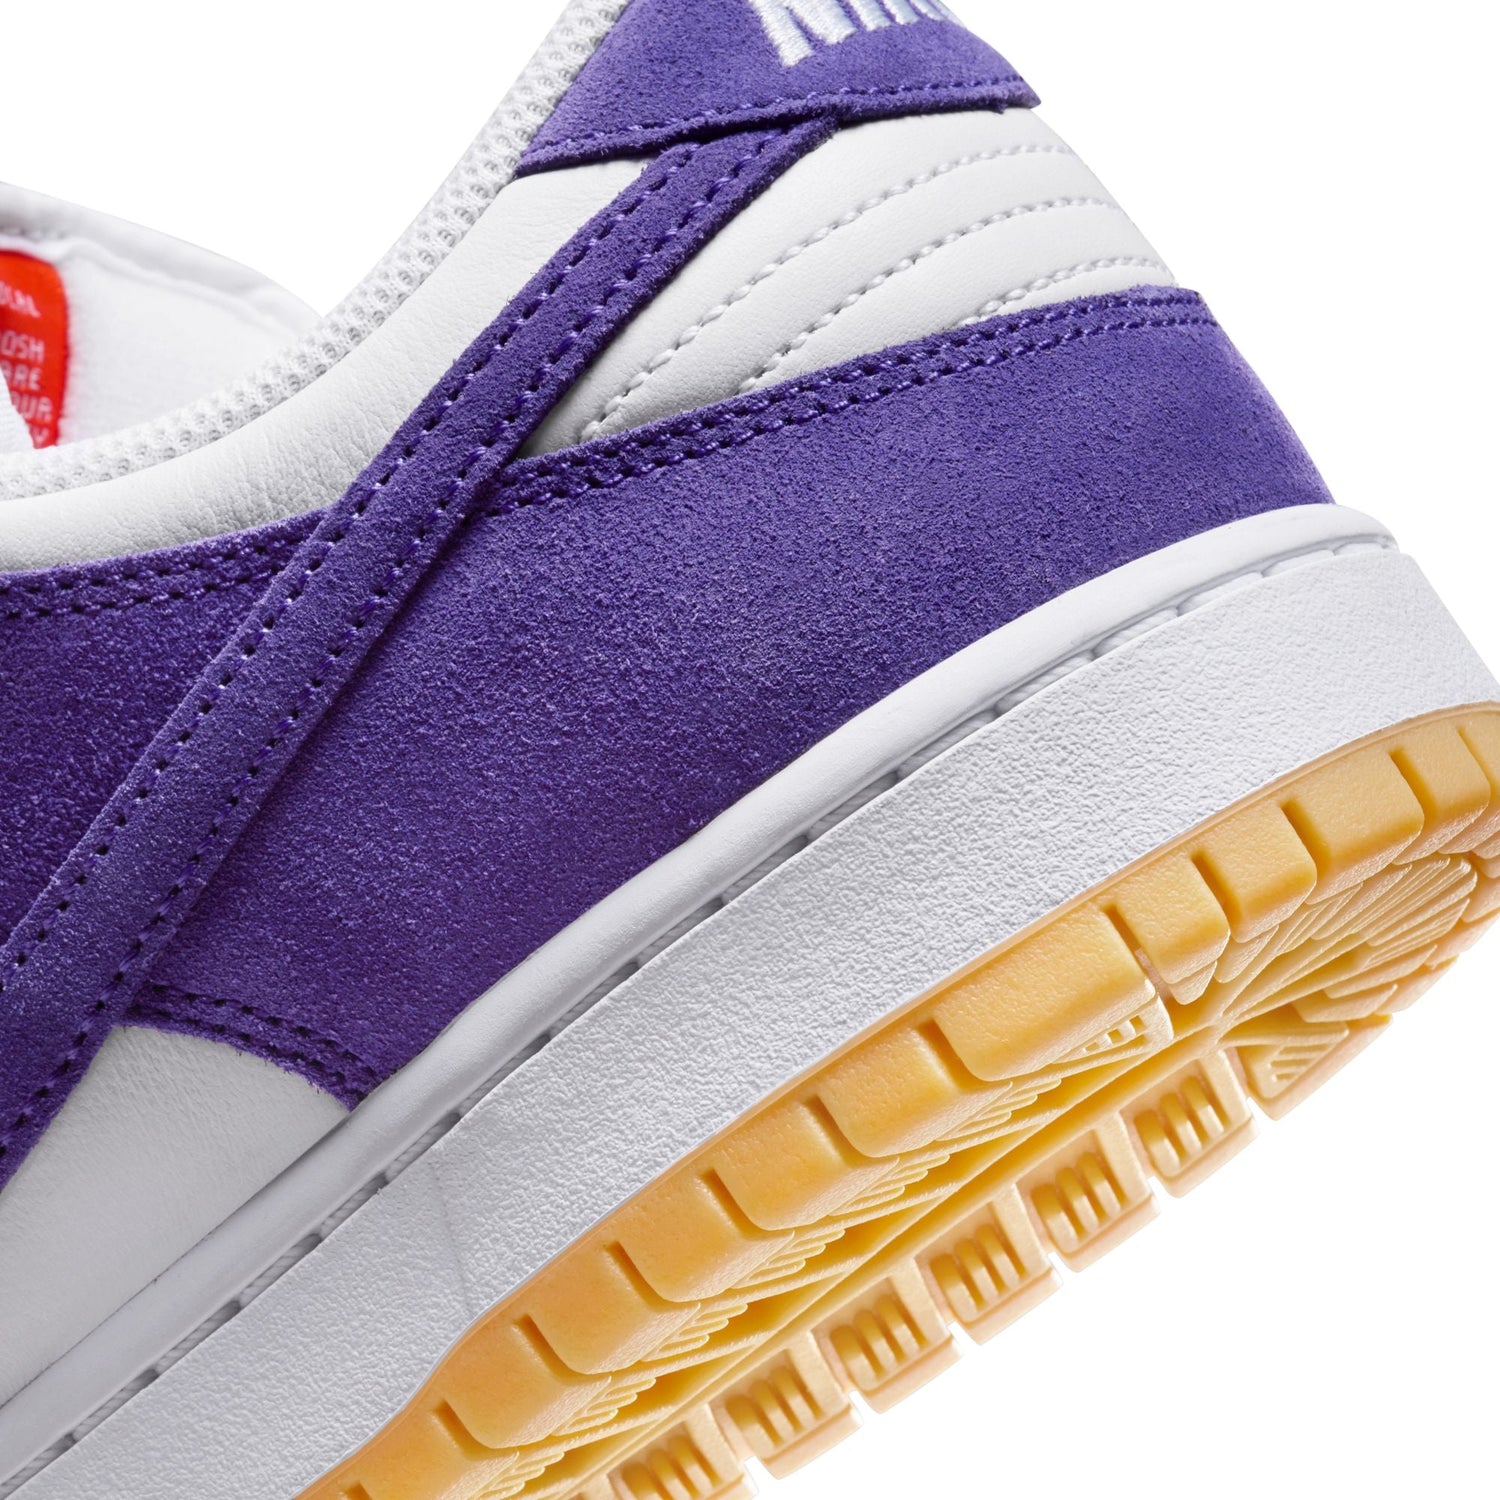 DUNK LOW PRO ISO COURT PURPLE / WHITE